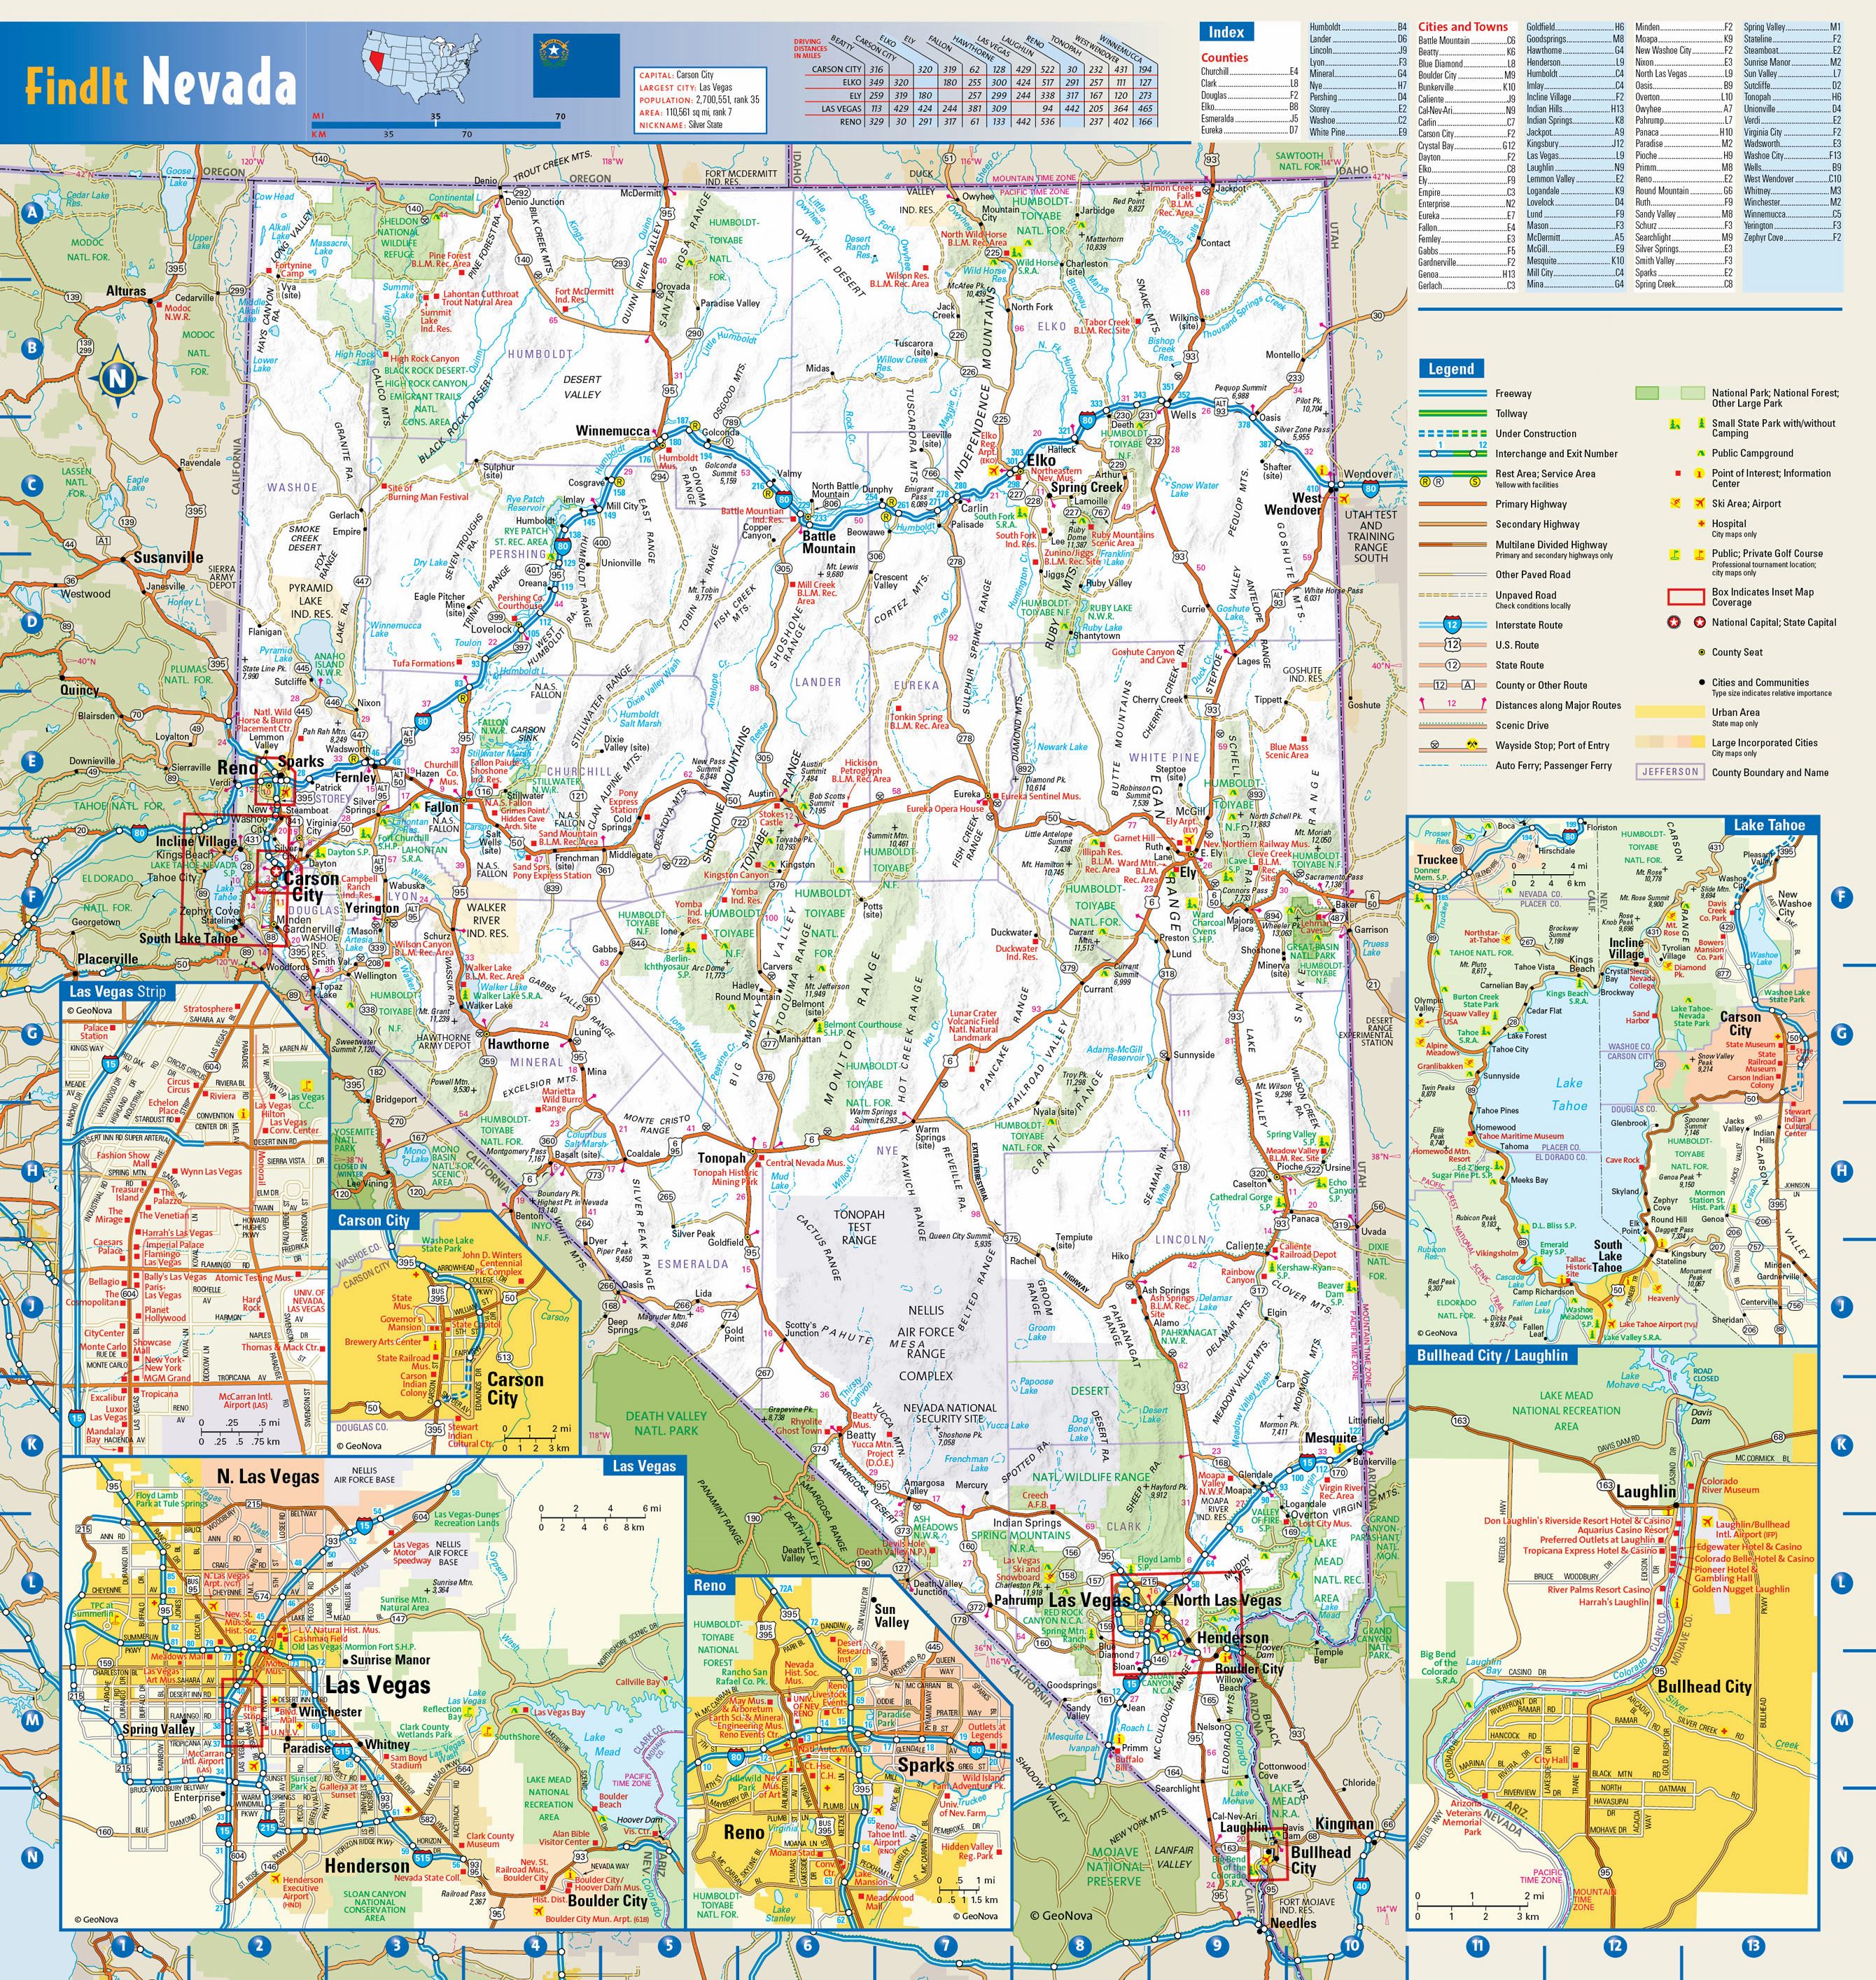 Large Nevada Maps for Free Download and Print HighResolution and